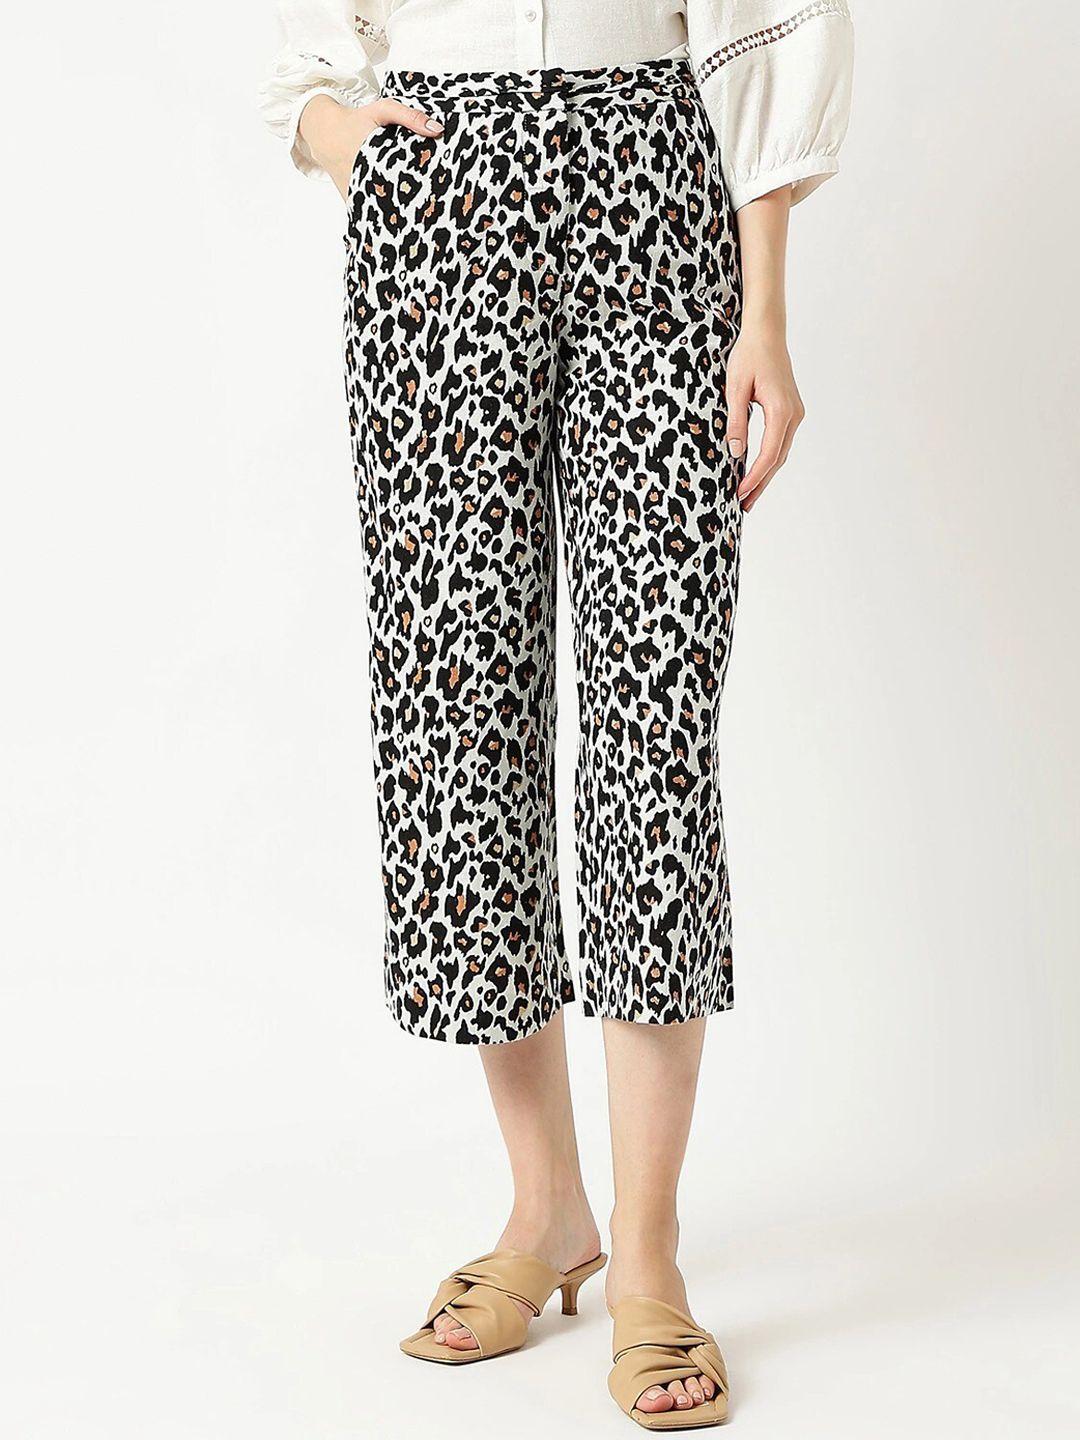 marks & spencer women animal printed high-rise culottes trousers